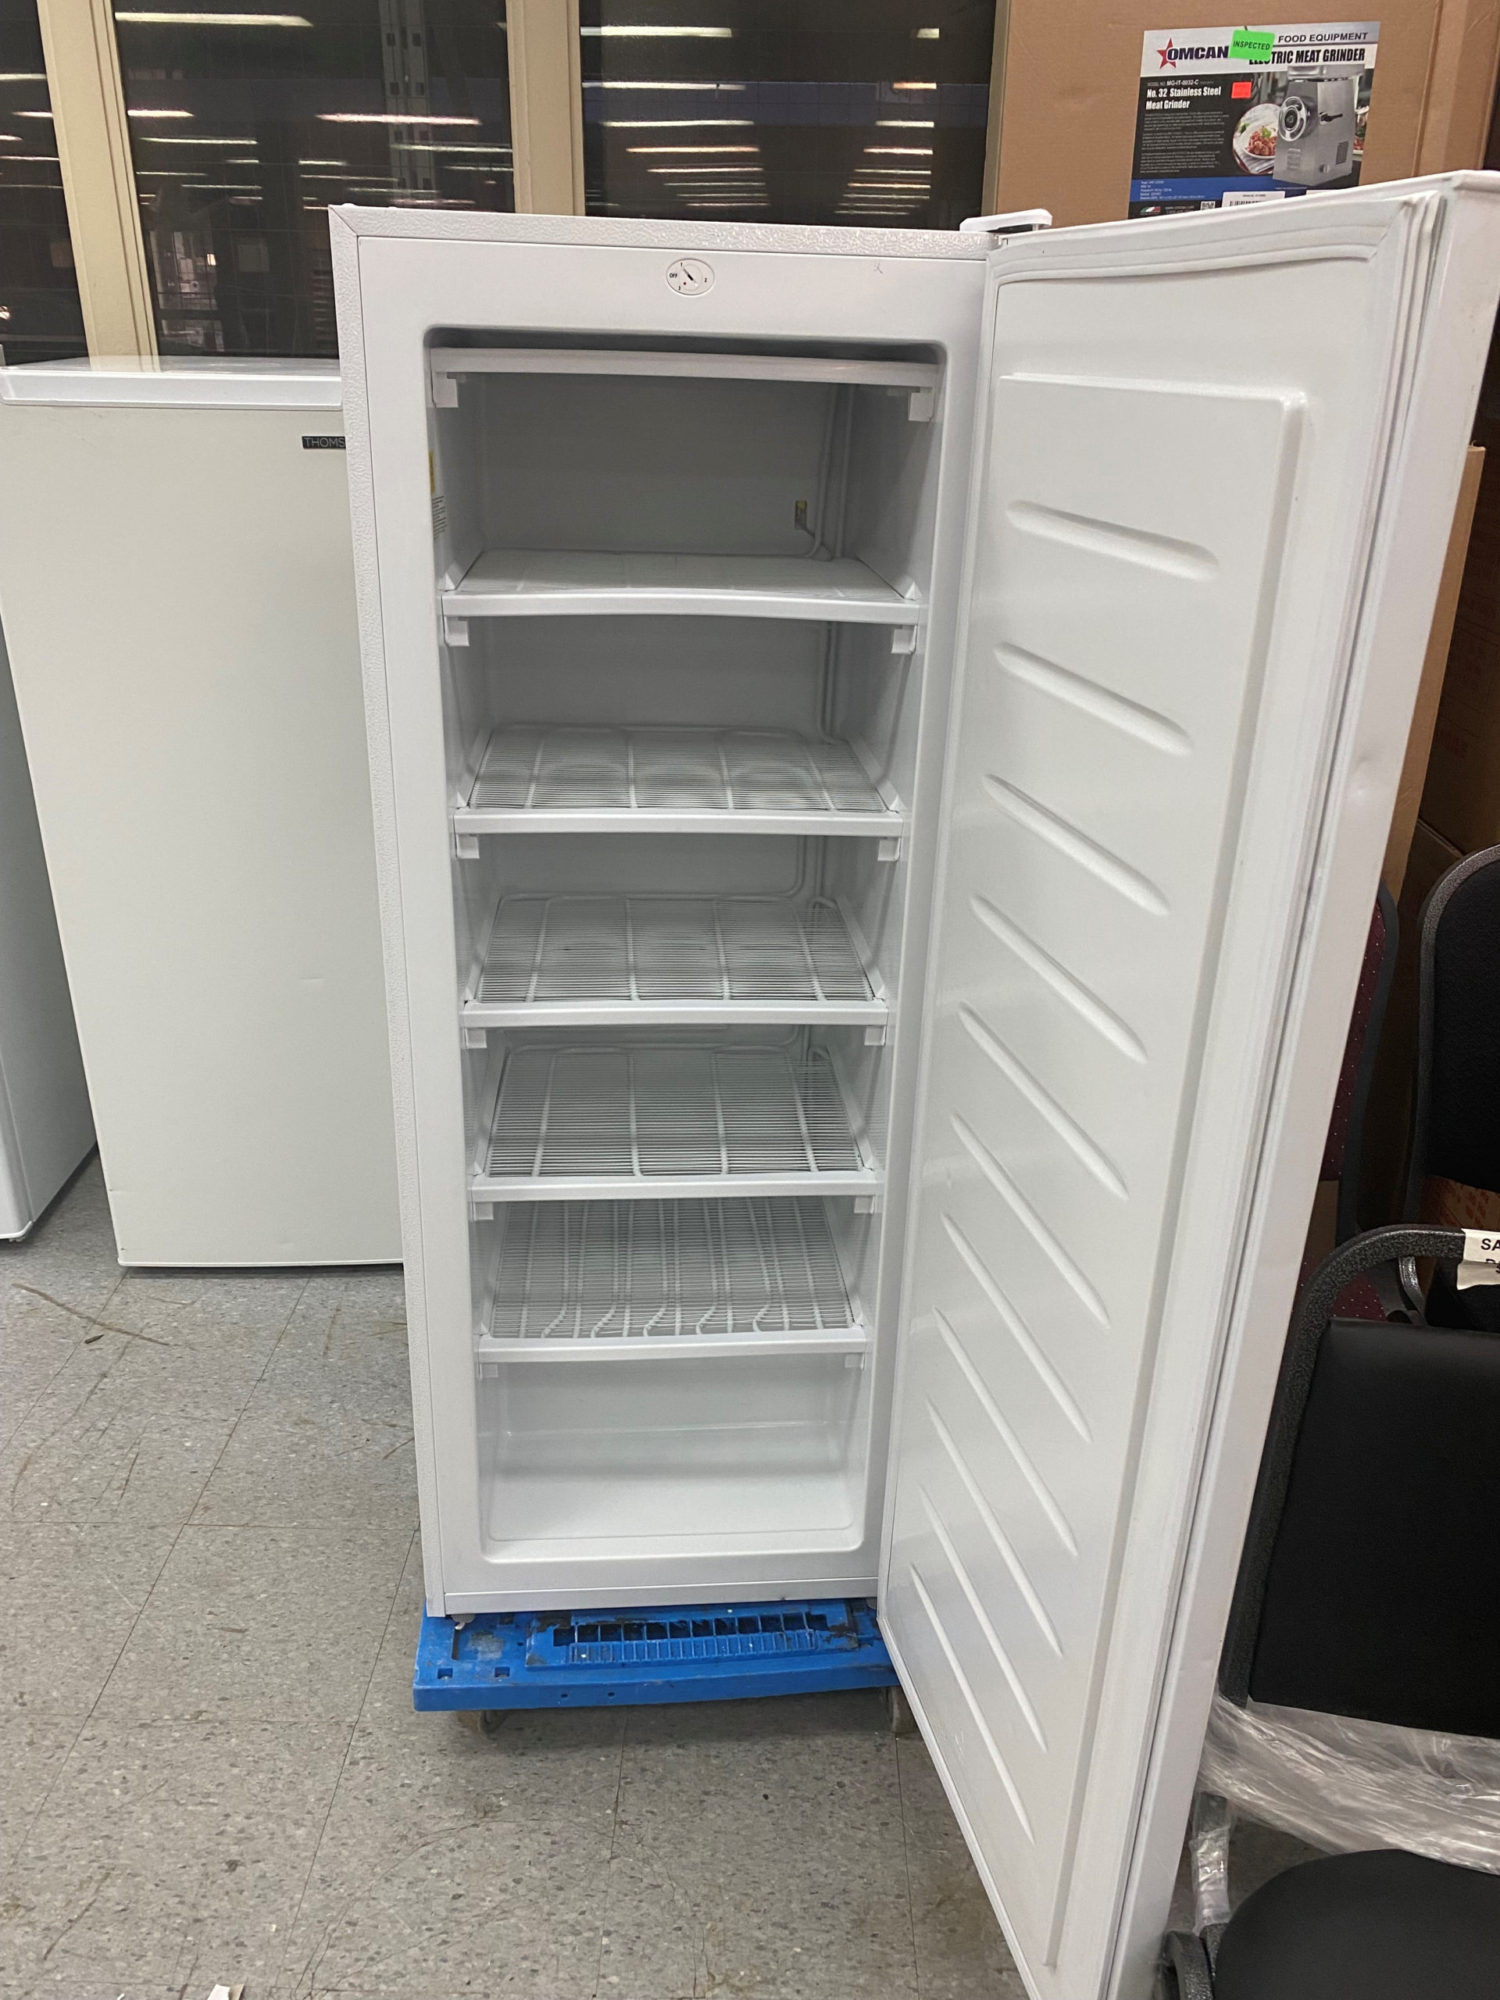 Thomson Used Upright Freezer (6.5 cu. ft.) - WORKING CONDITION